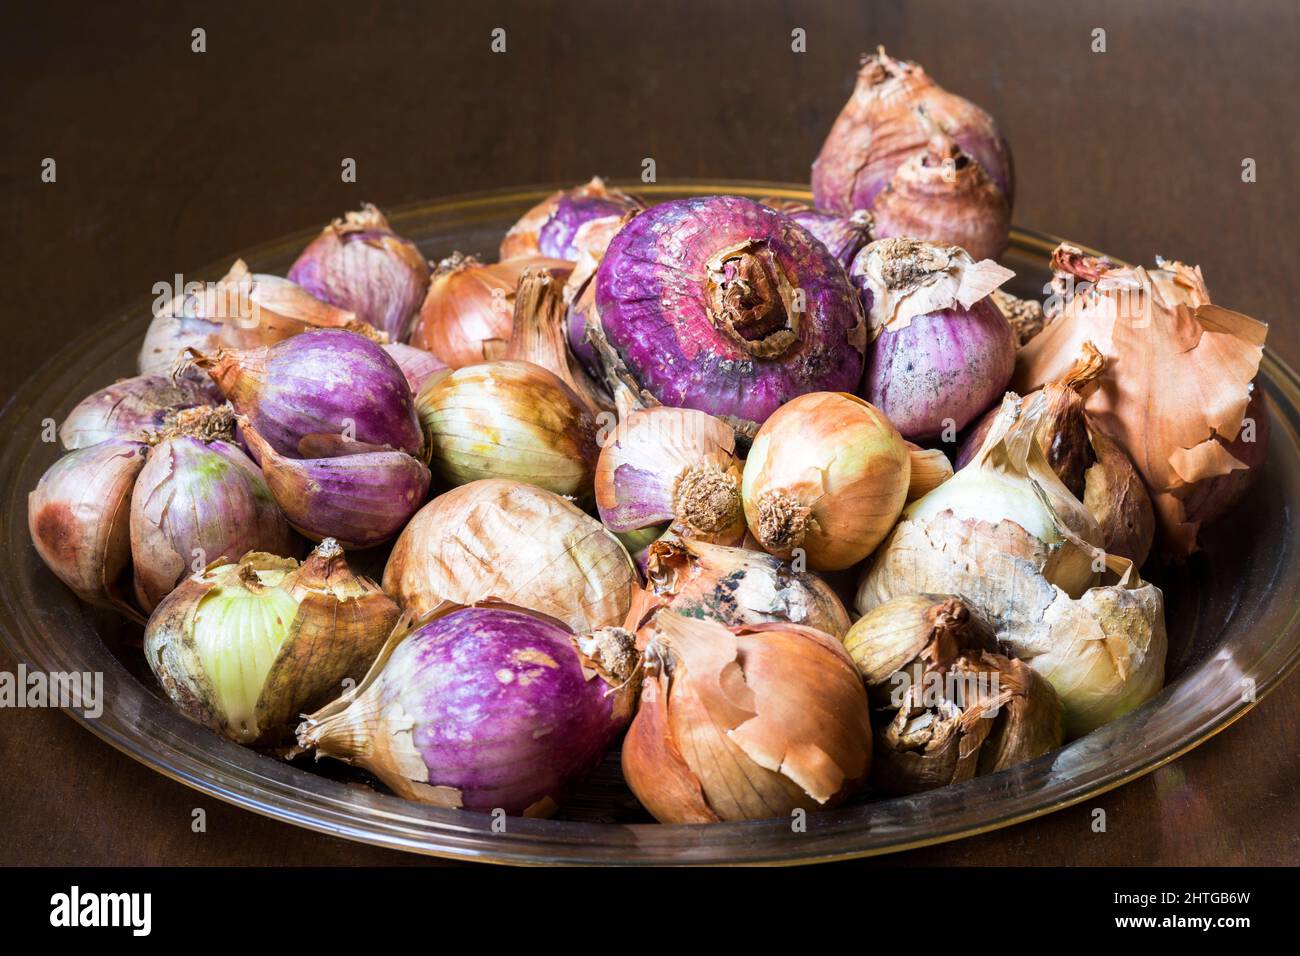 Heap of brown and purple shallots, Allium Cepa onions, and brown onions Stock Photo